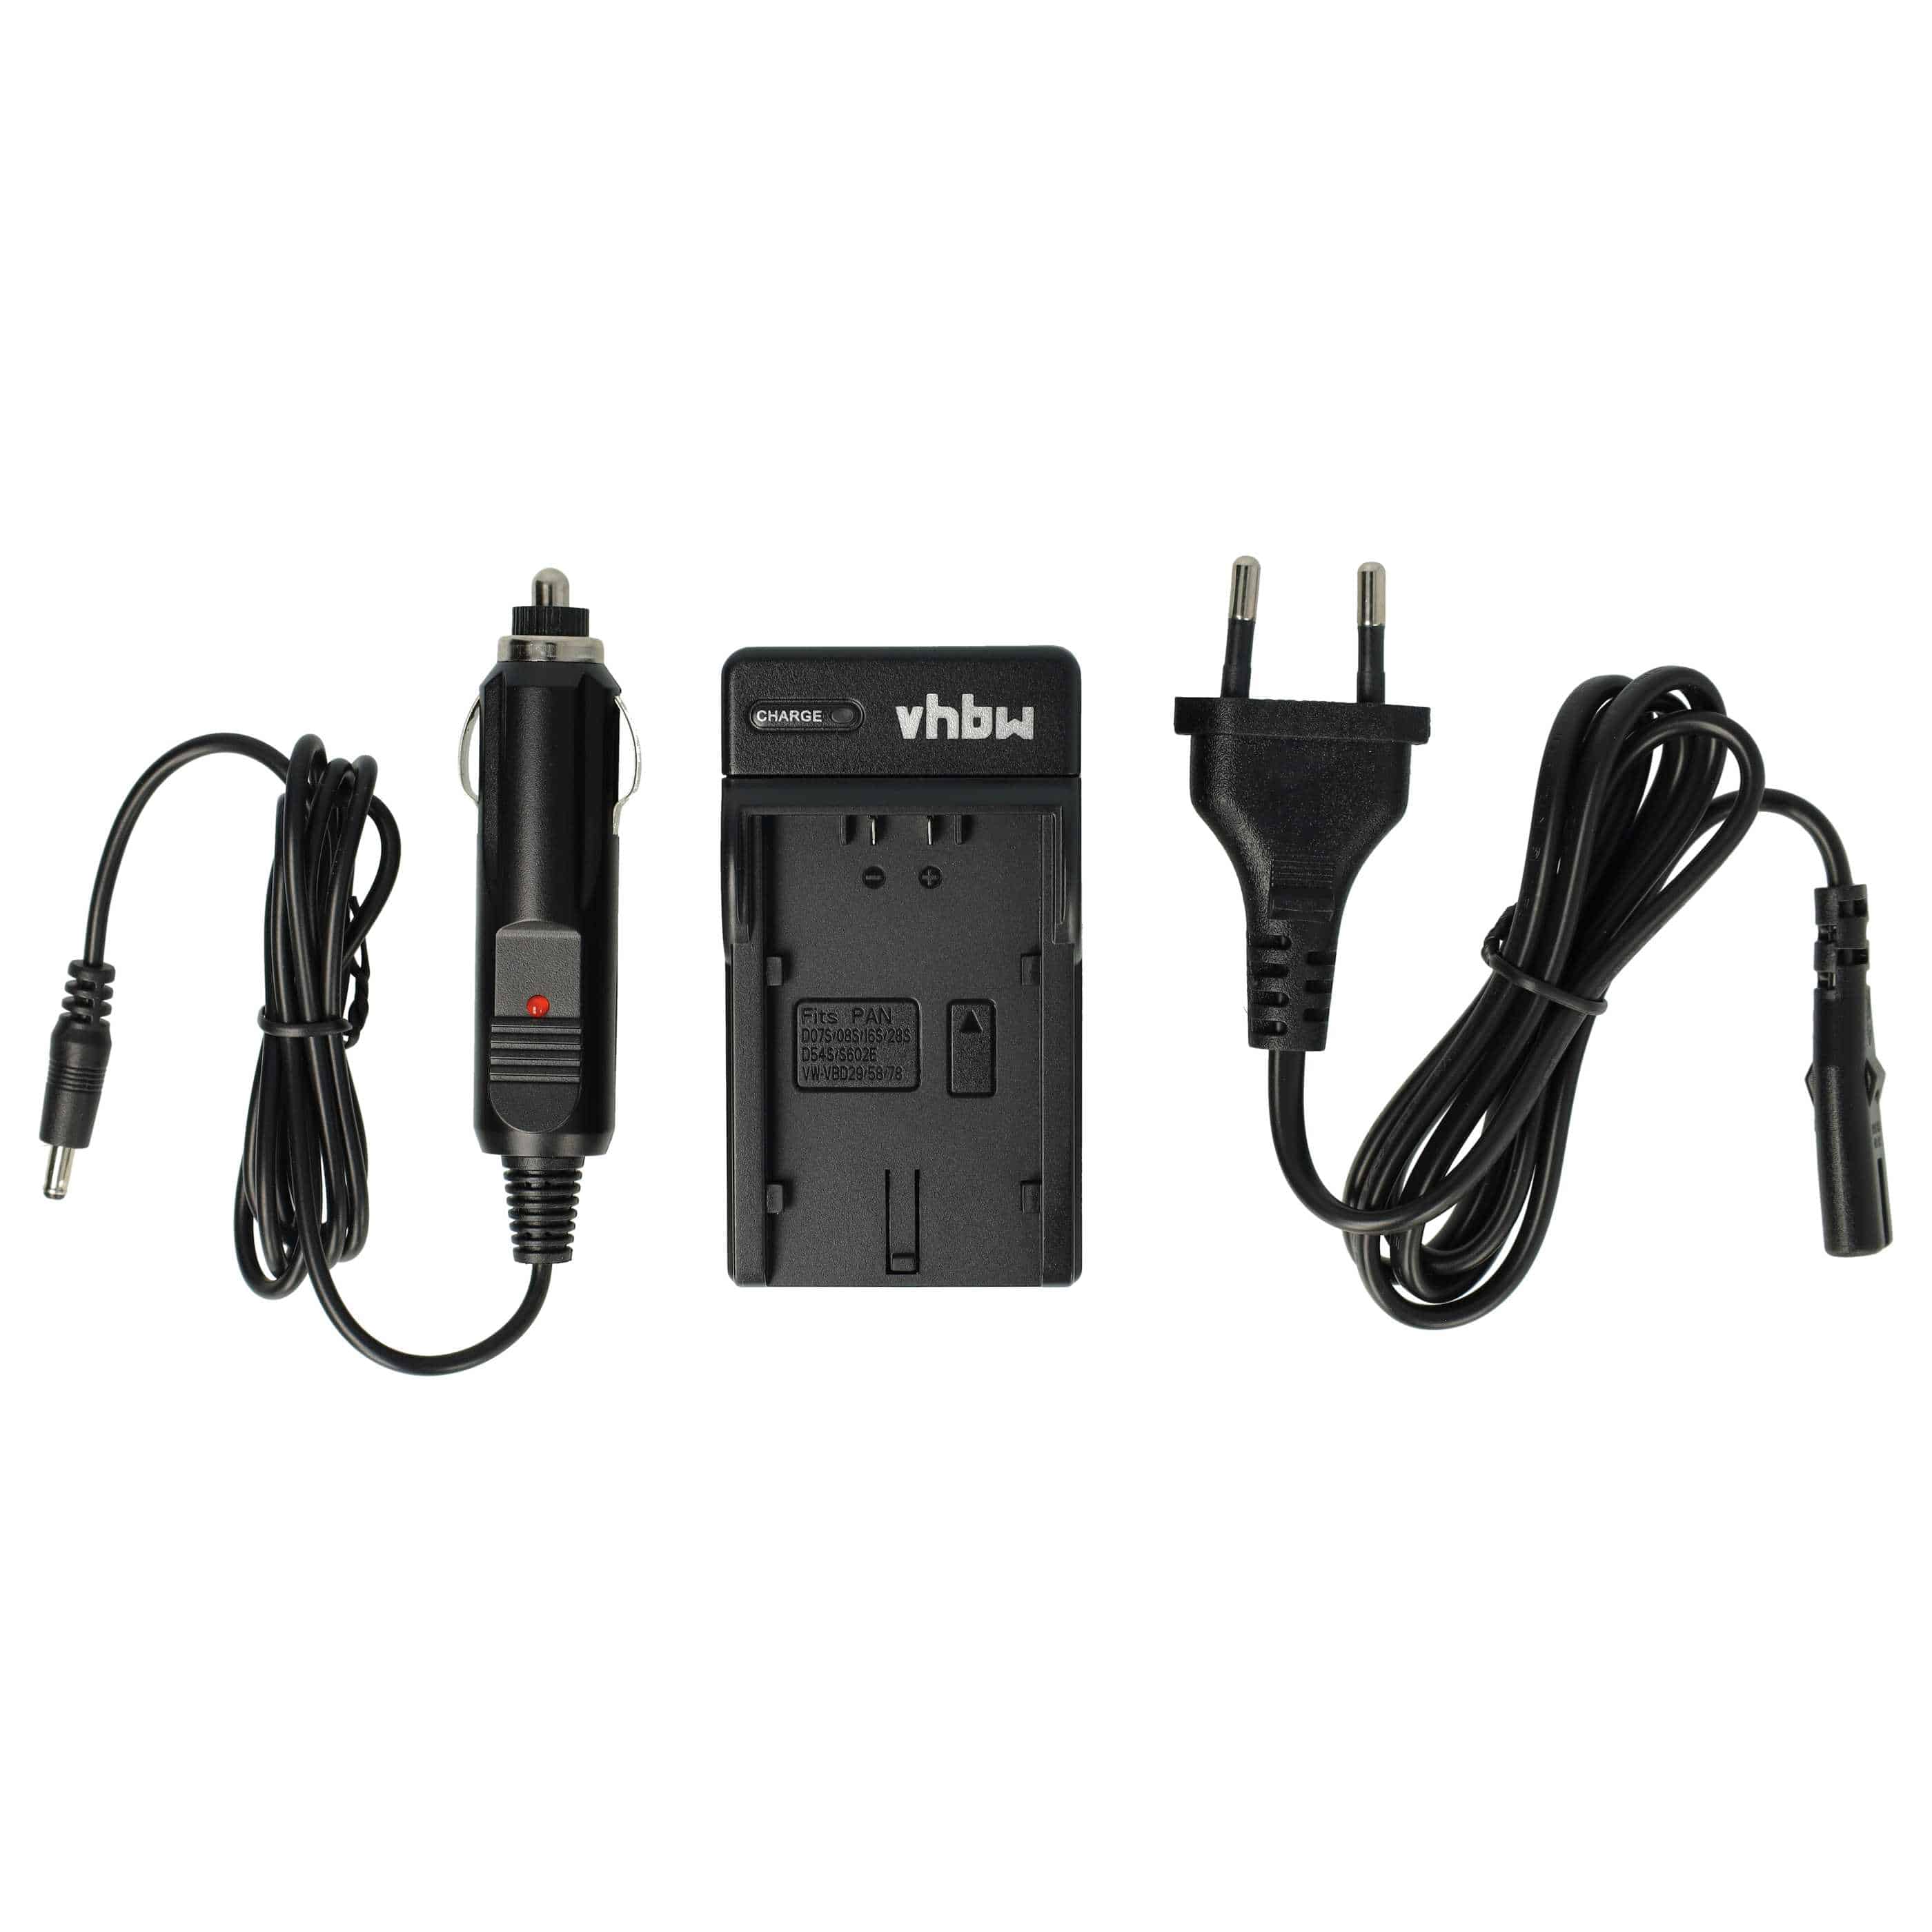 Battery Charger suitable for AG-AC8 Camera etc. - 0.6 A, 8.4 V